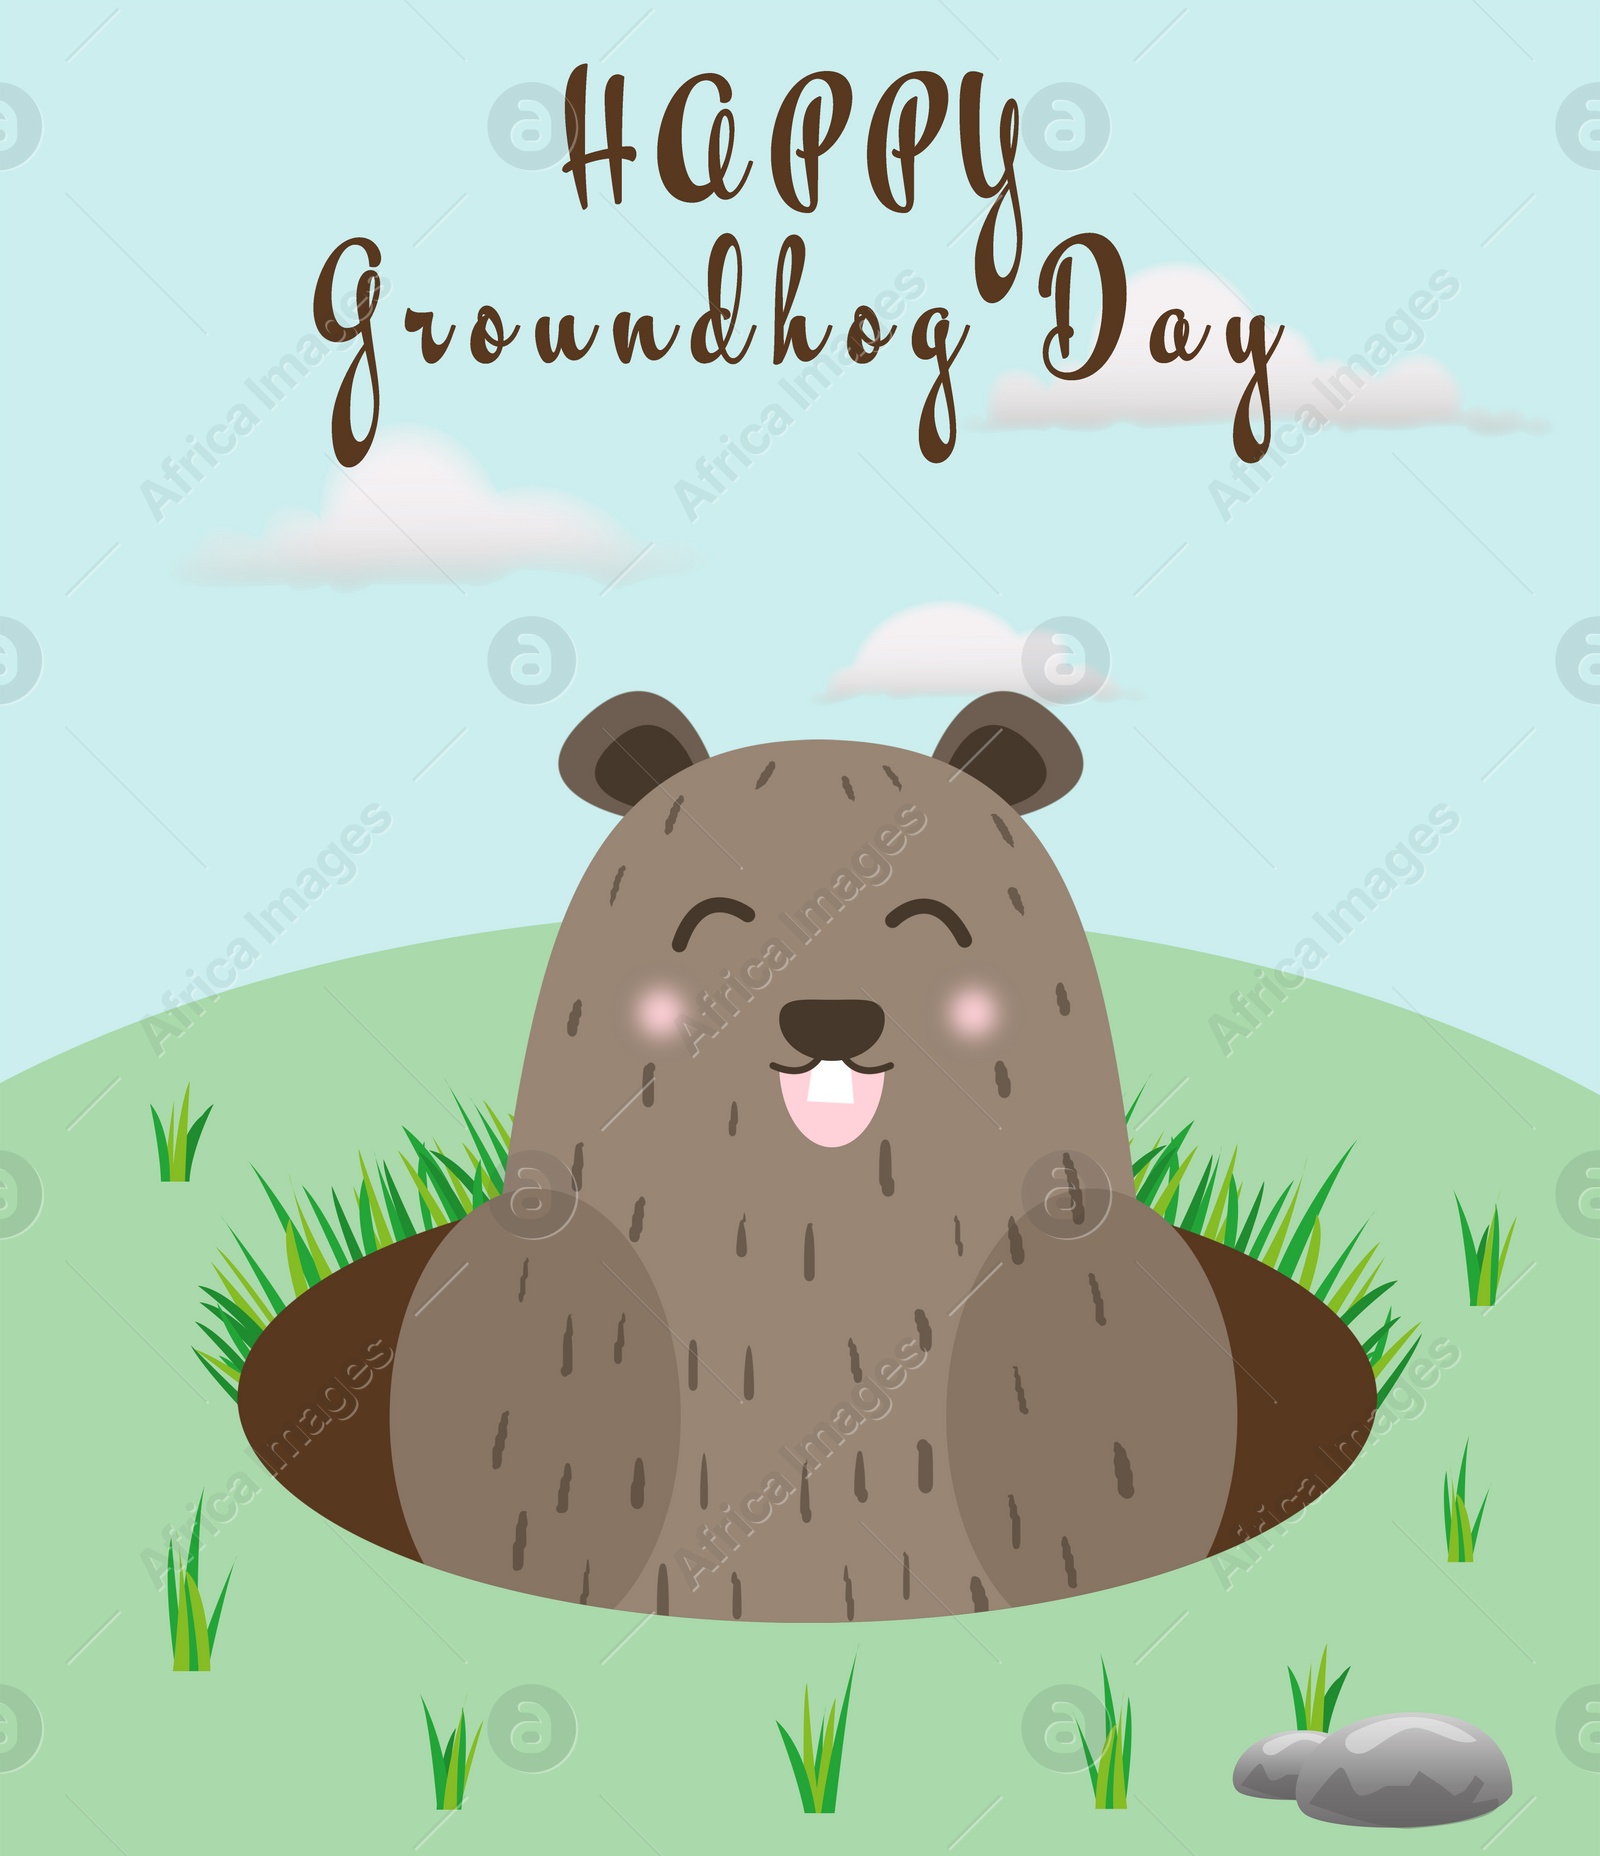 Illustration of Happy Groundhog Day greeting card with cute cartoon animal